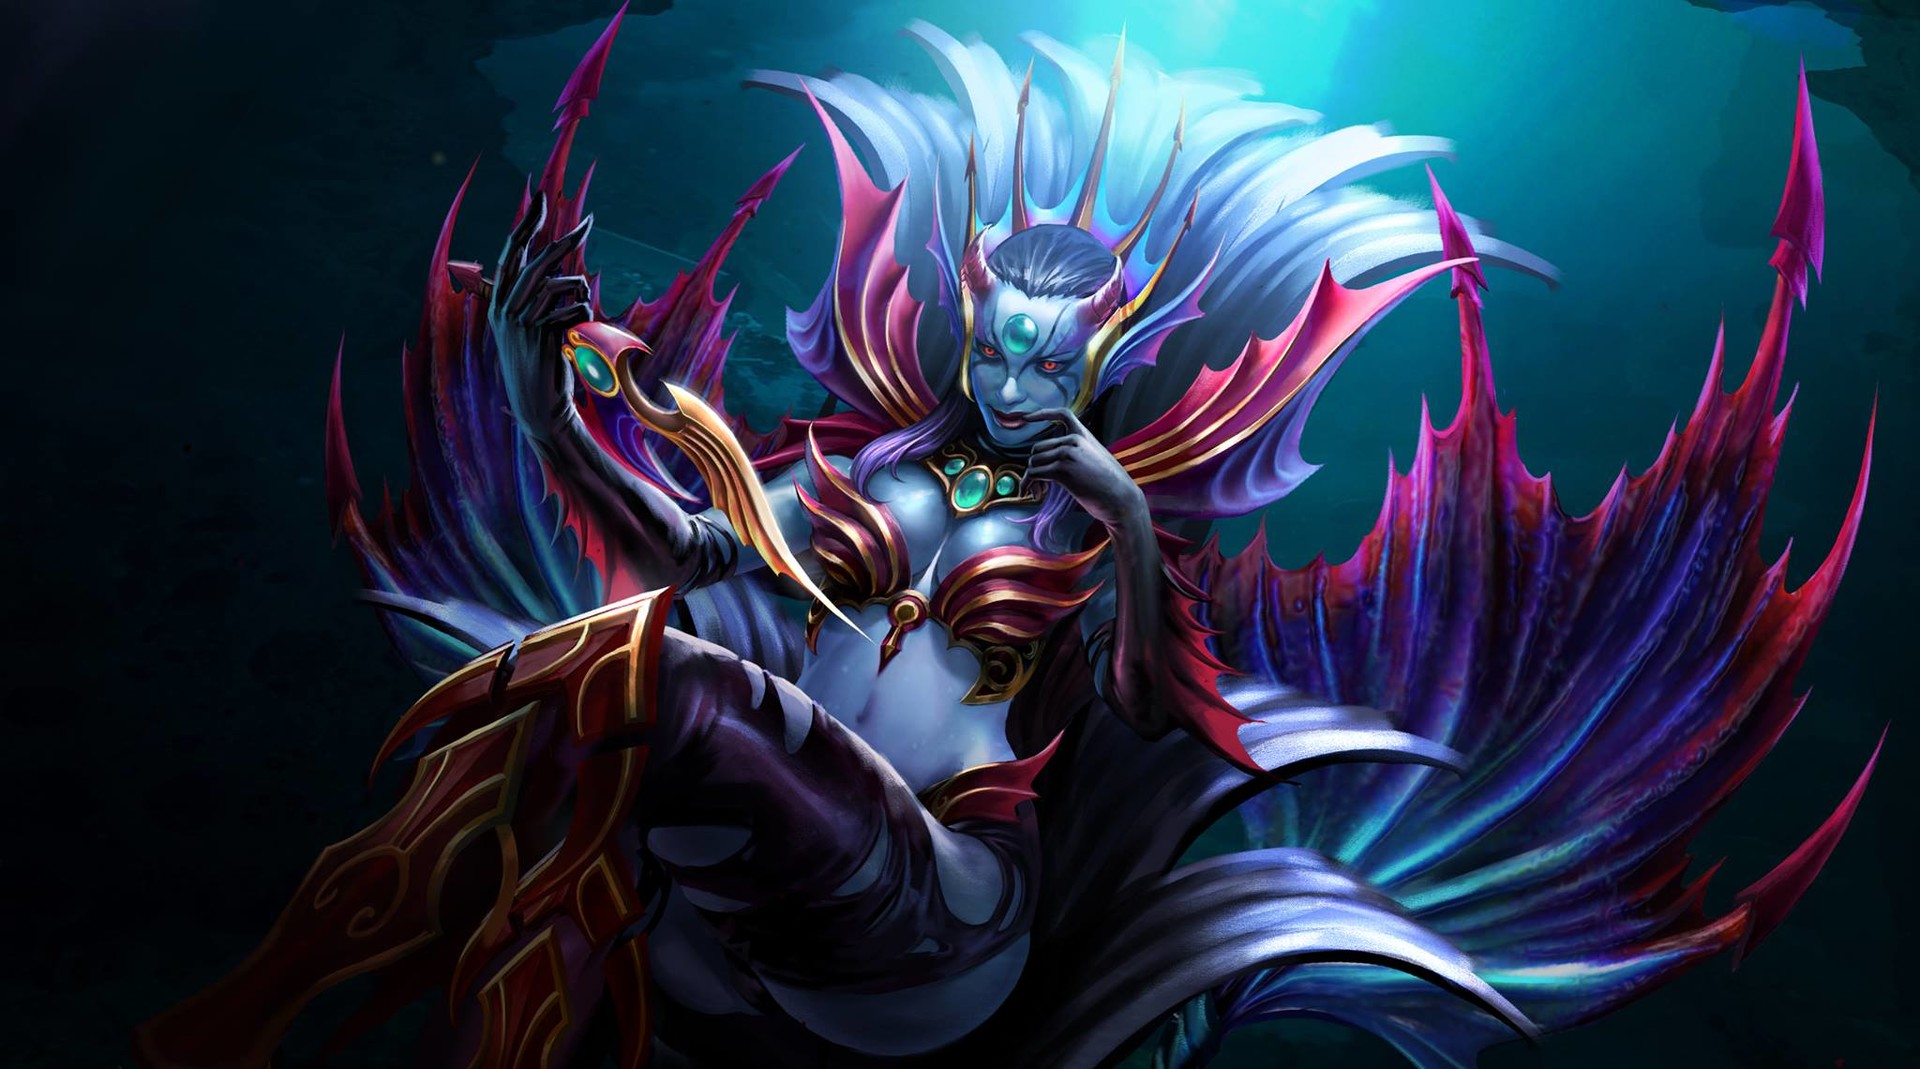 View, Download, Rate, and Comment on this Dota 2 Art. 